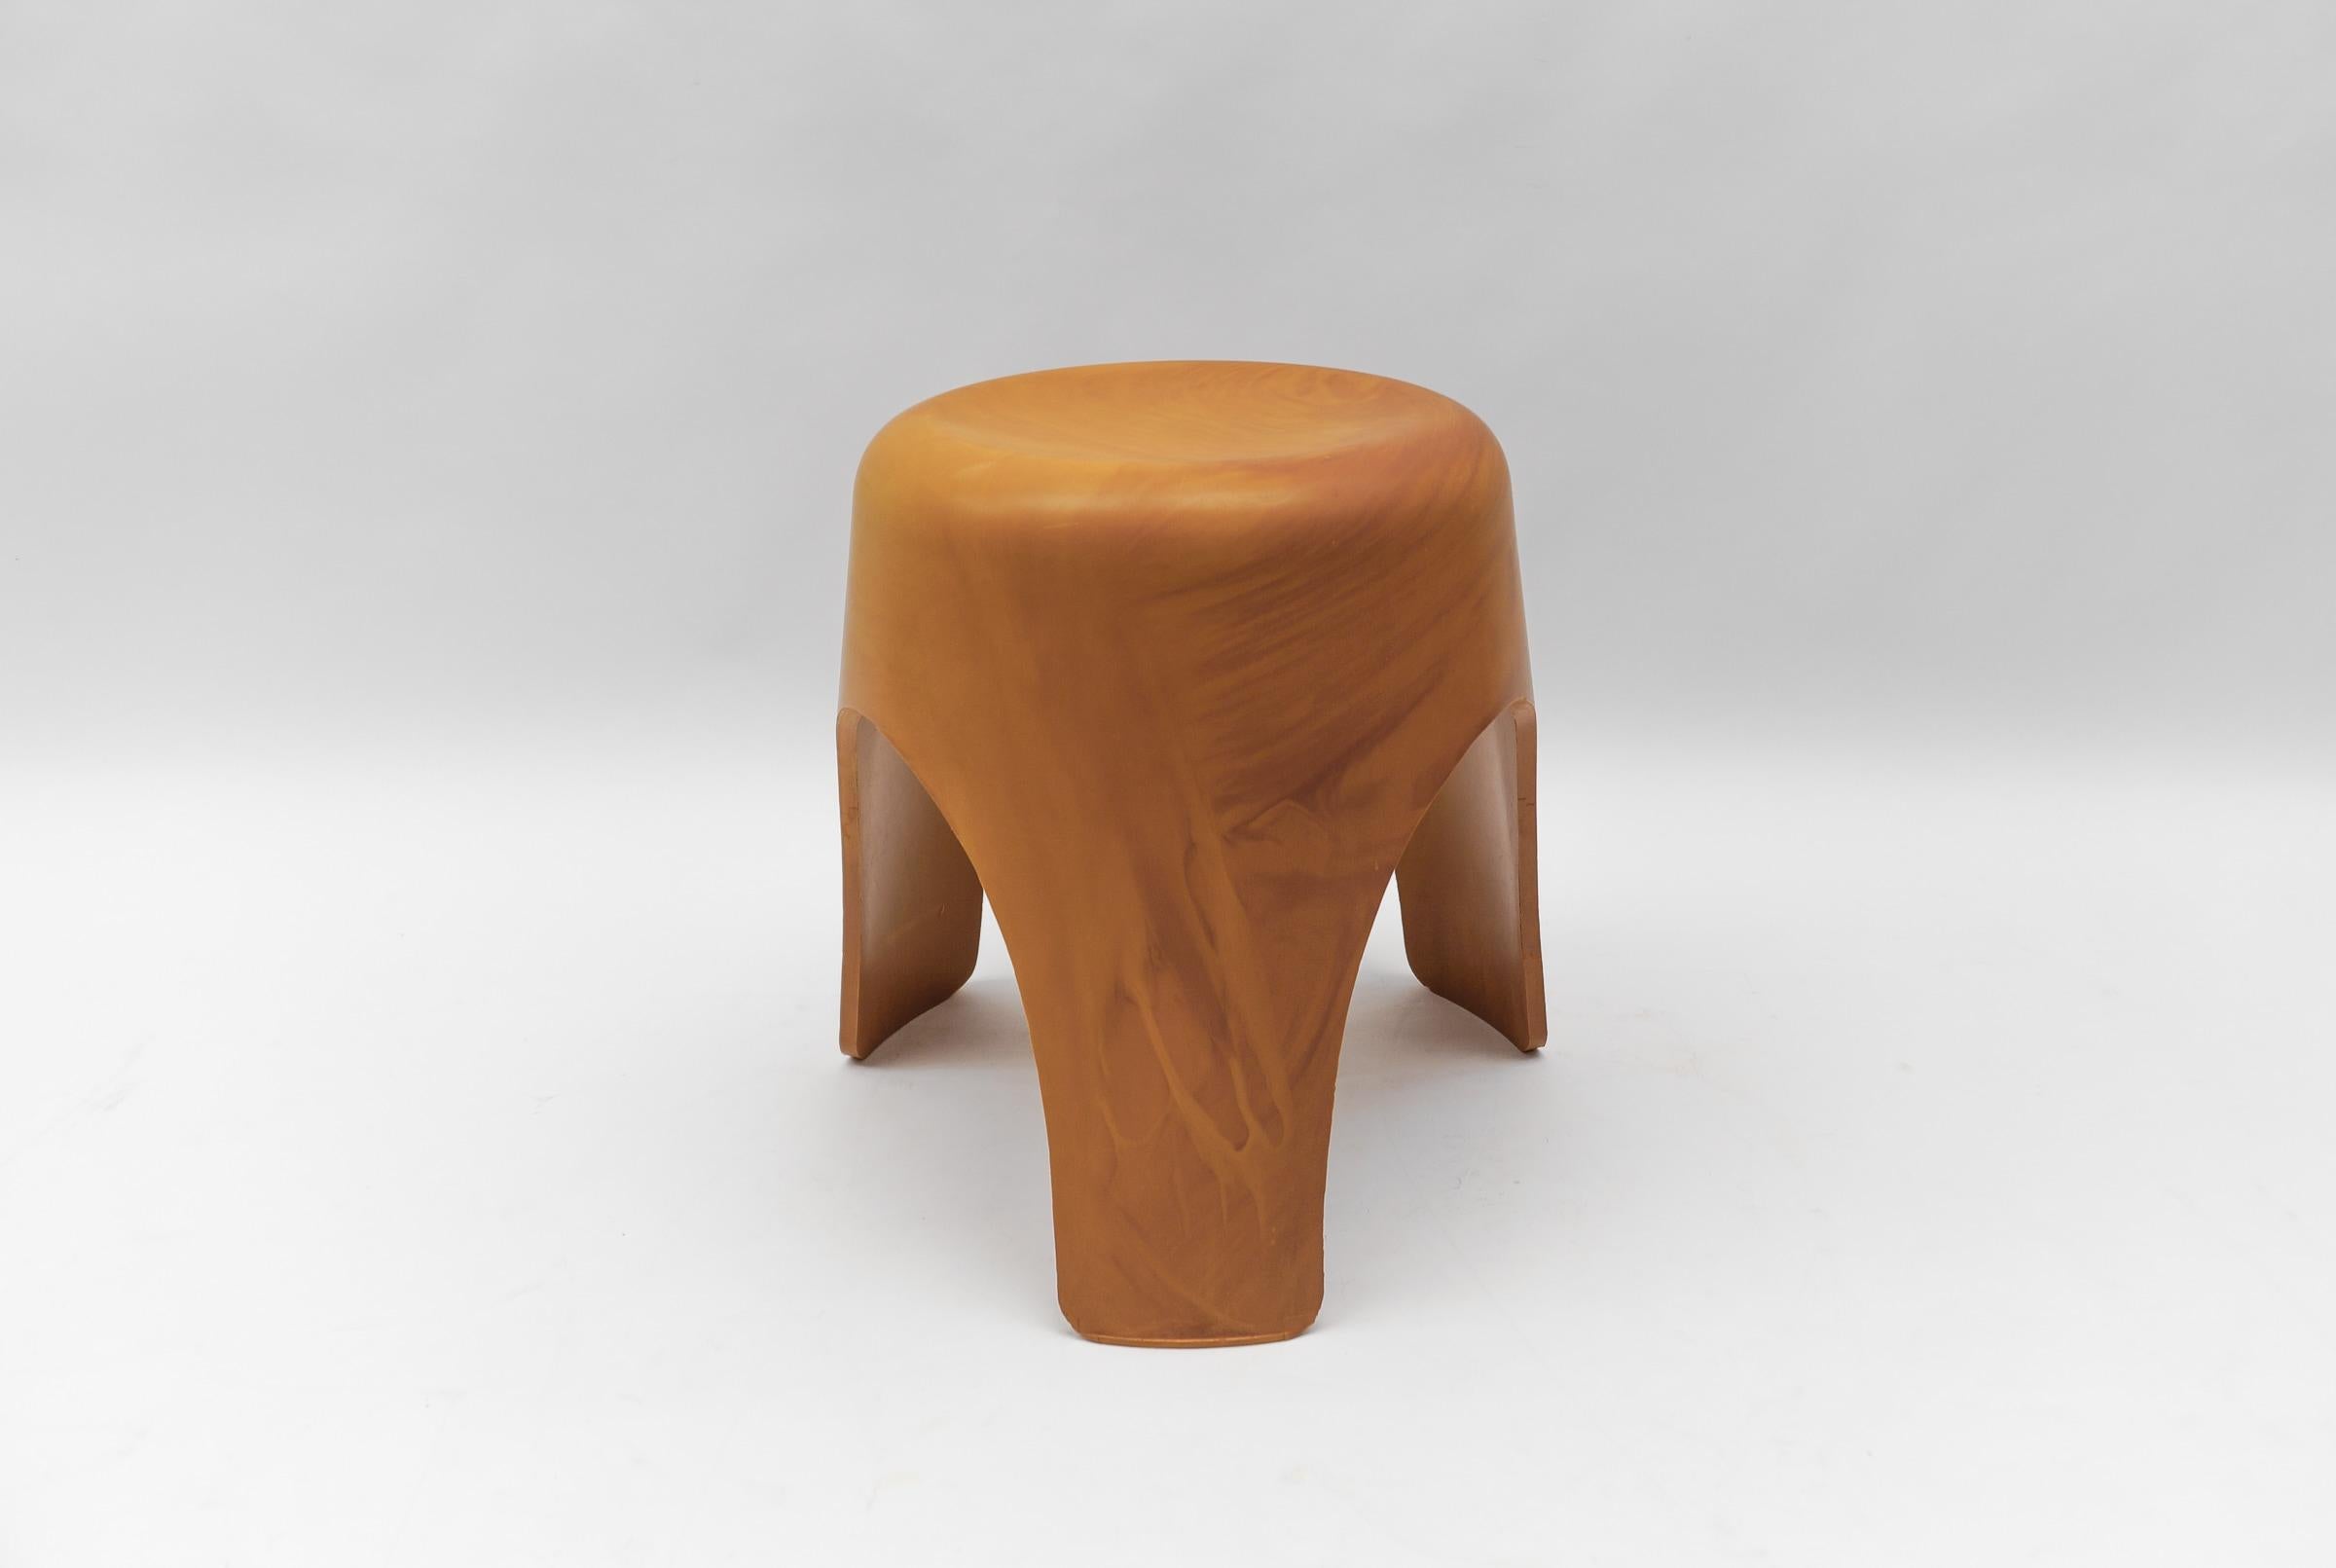 2. of 2 Elephant Stool attributed to Sori Yanagi, 1950s

Probably Prototype.

We have a total of 2 of these stools. They are made of a plastic mixture and appear to be prototypes or molds.

The second stool is also offered here on the platform.